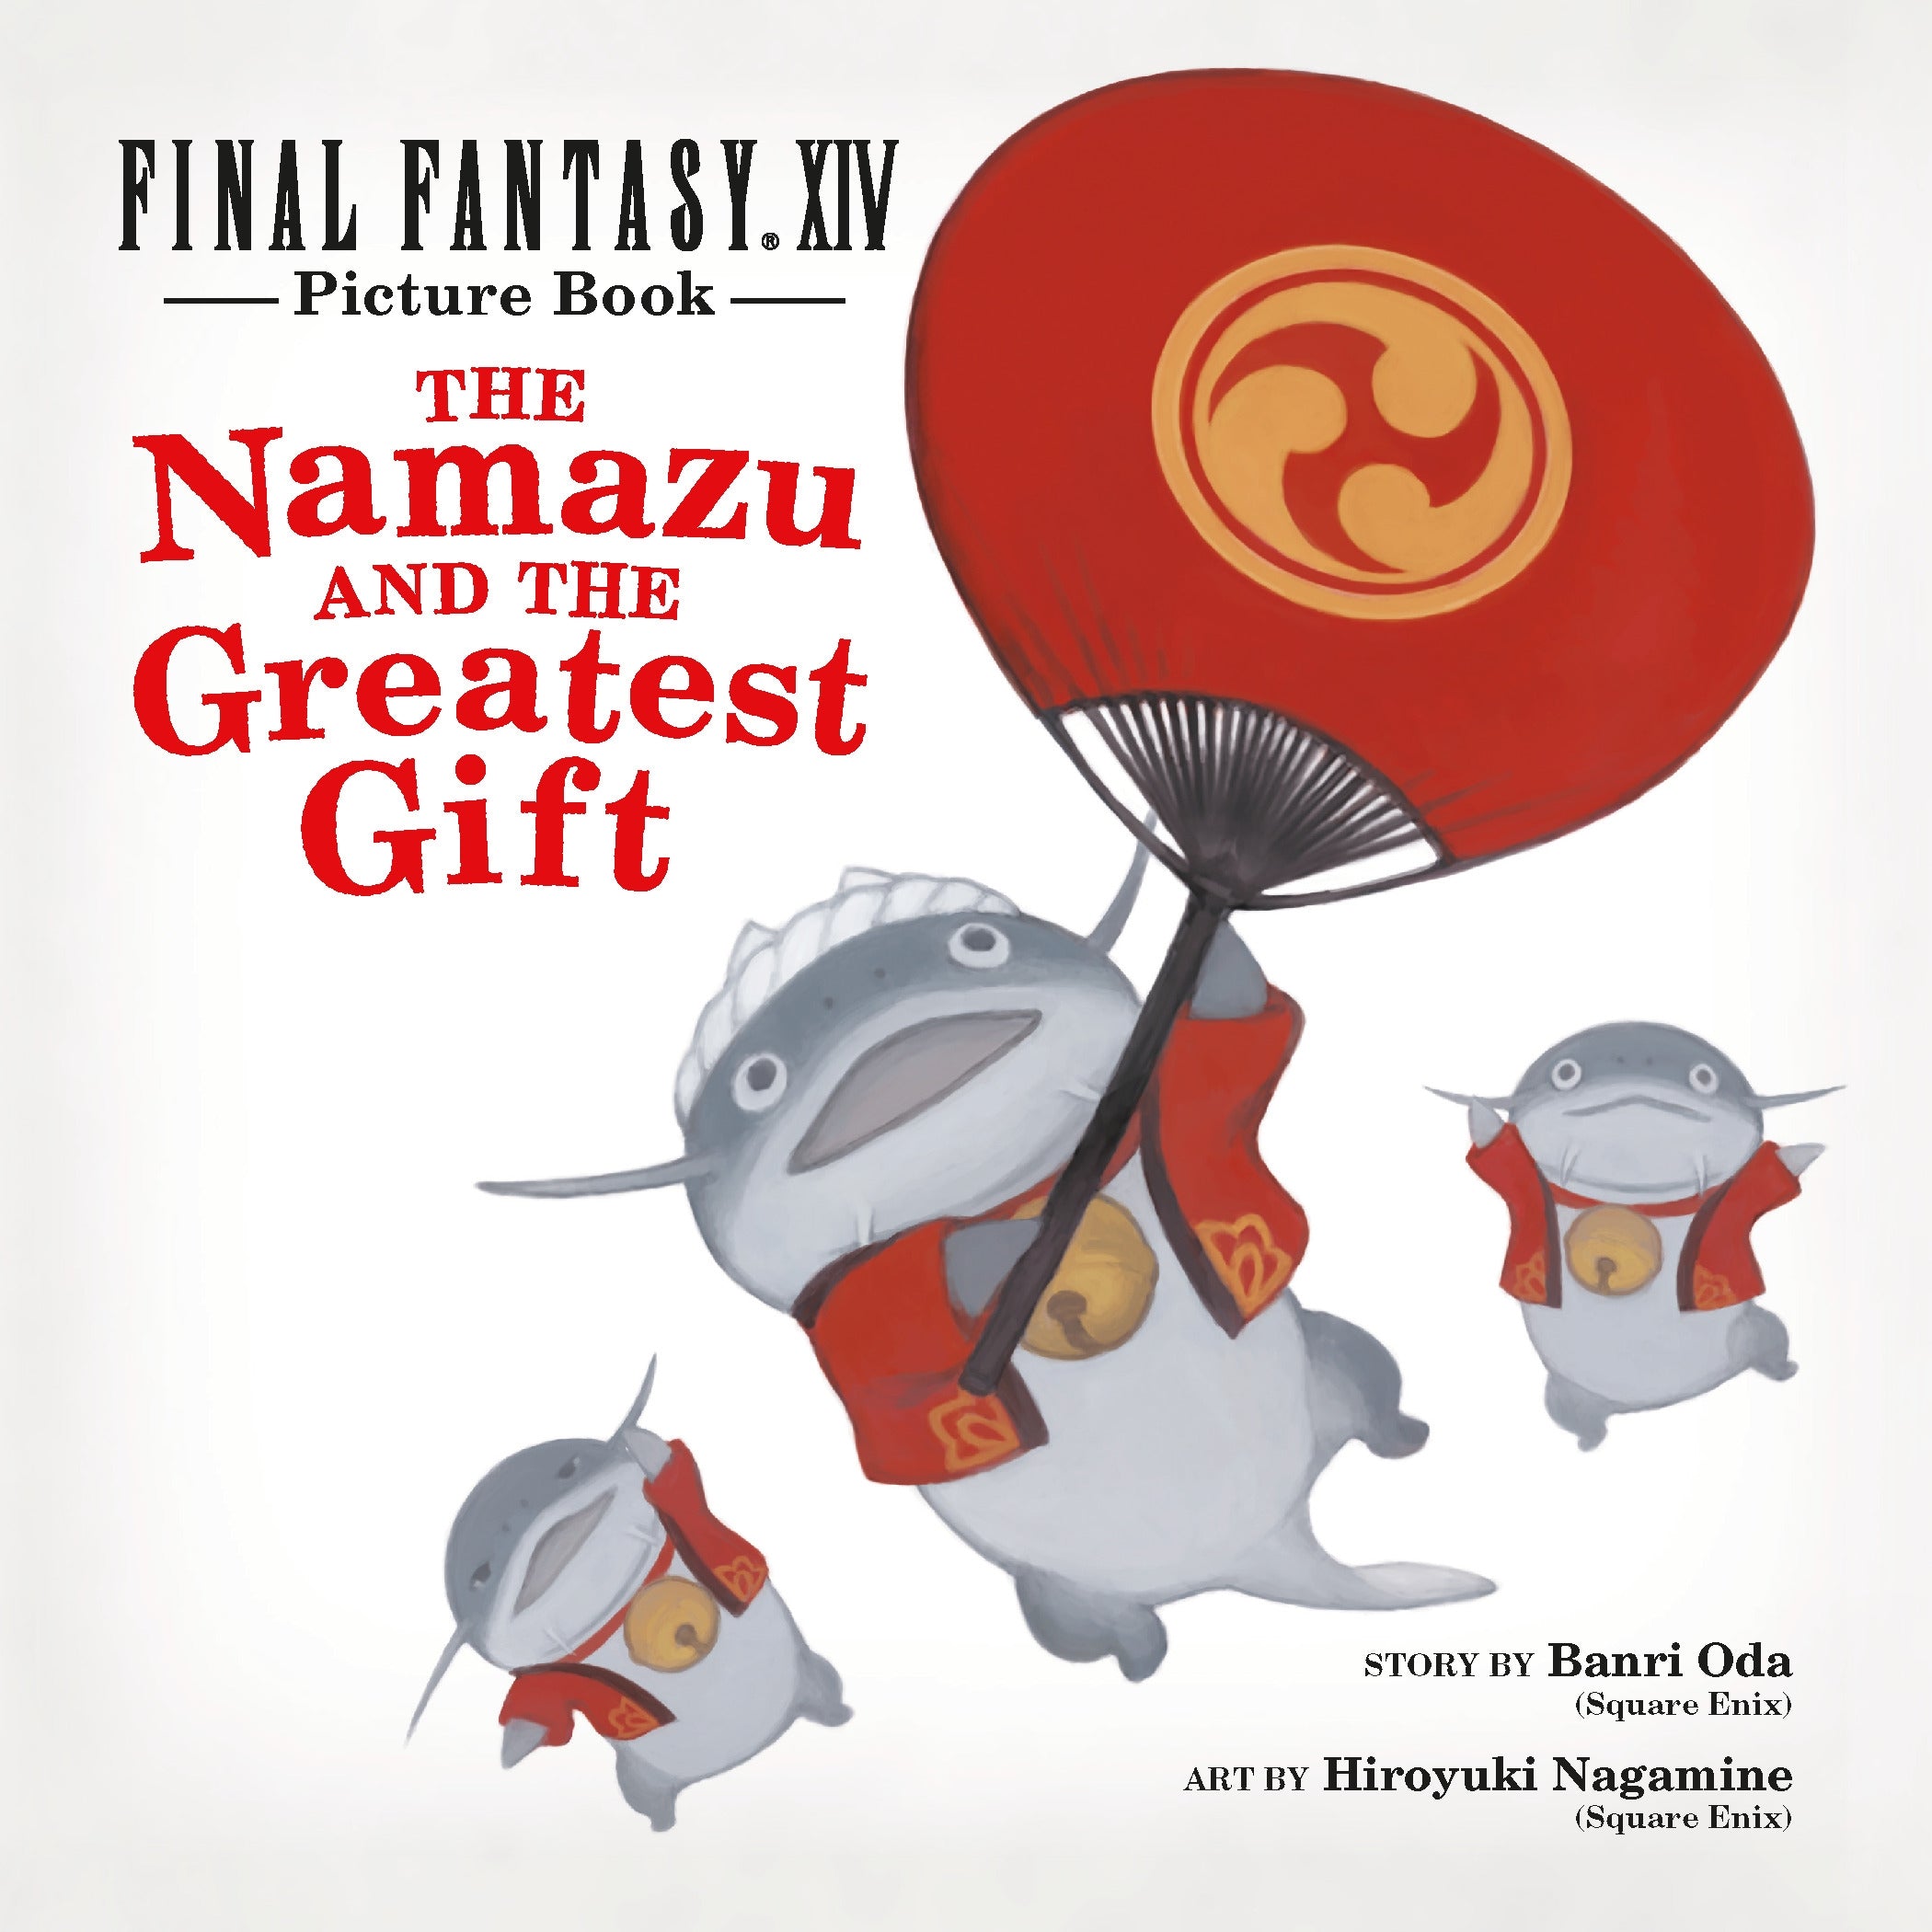 Final Fantasy XIV Picture Book - The Namazu and the Greatest Gift